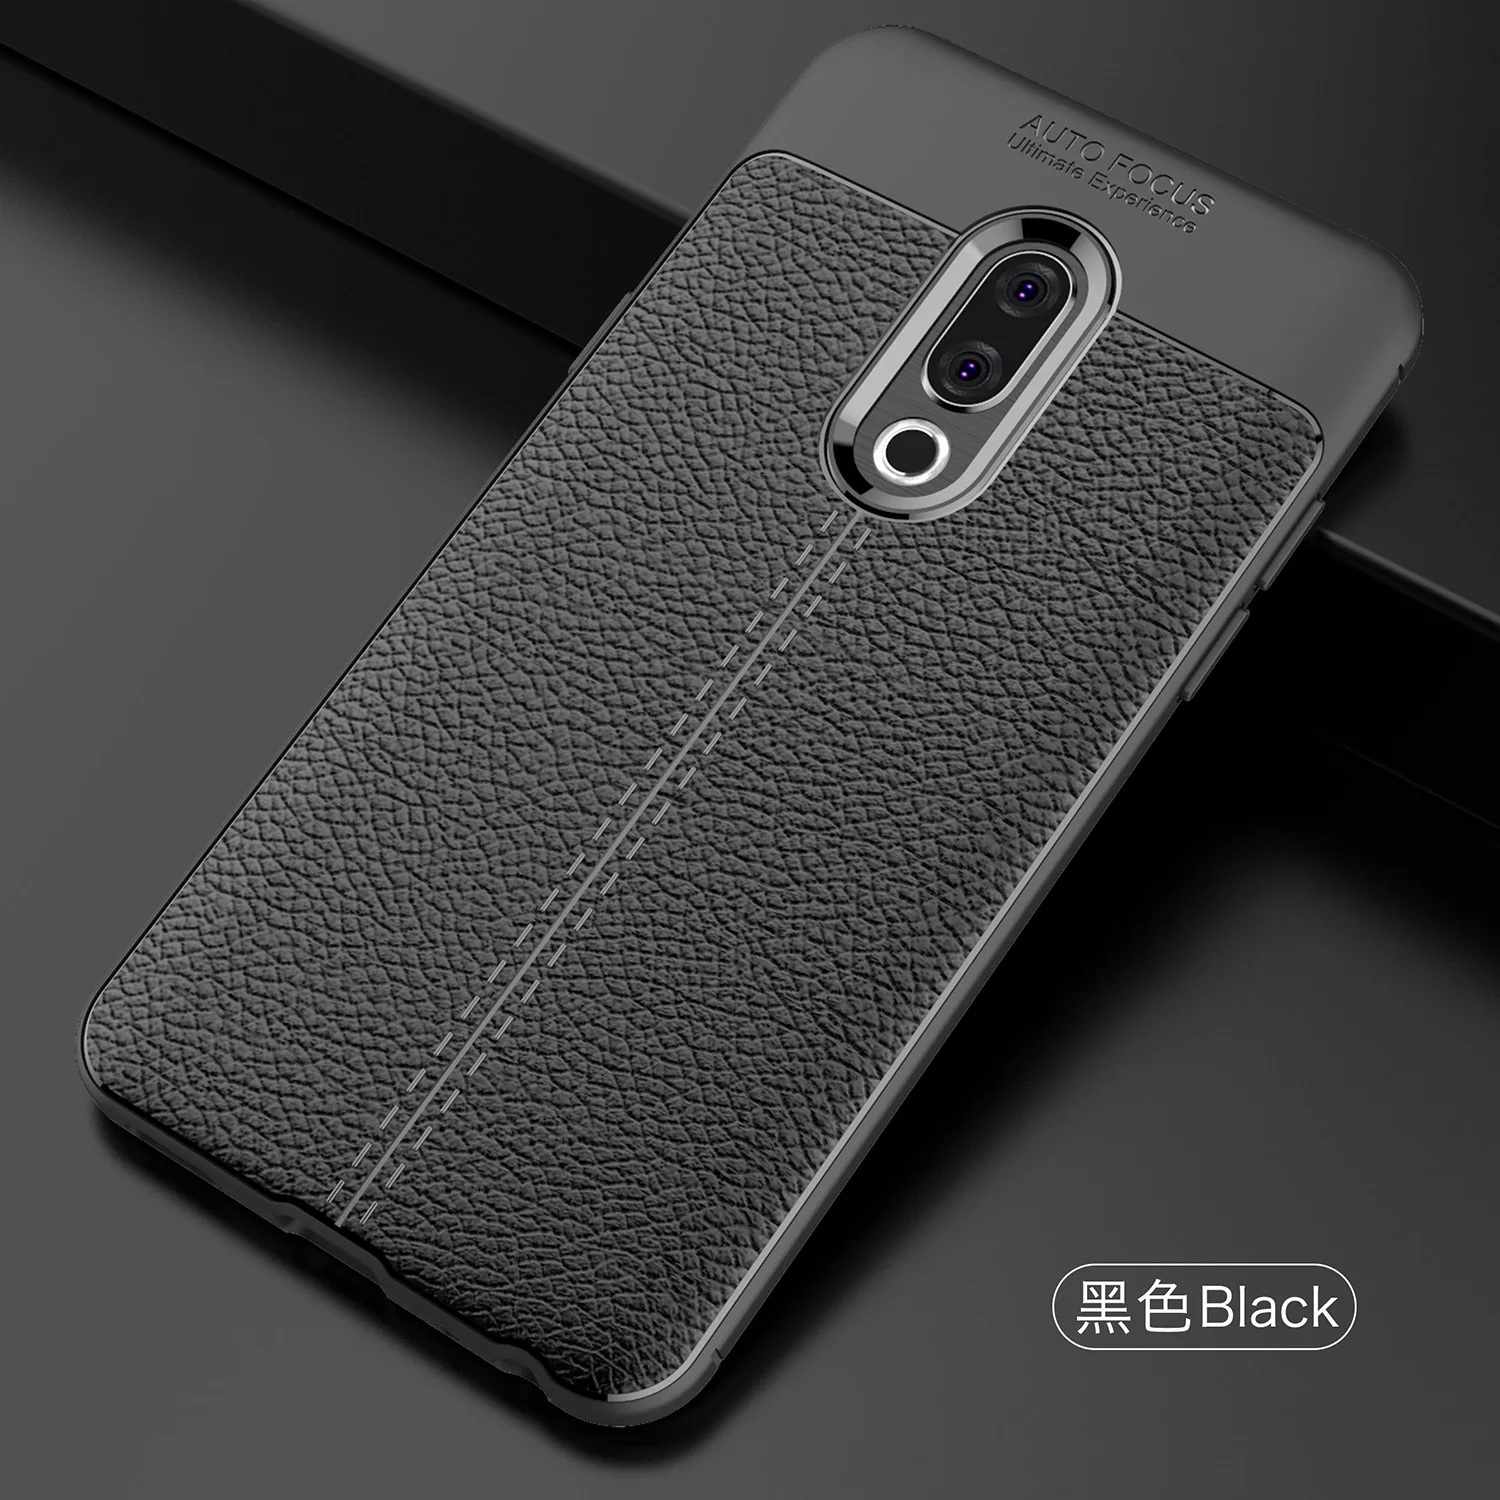 

Wolfsay Soft TPU Case For Meizu 15 Plus Case Leather Texture Silicone Phone Cover For Meizu 15 Plus Business Coque 5.95 inch